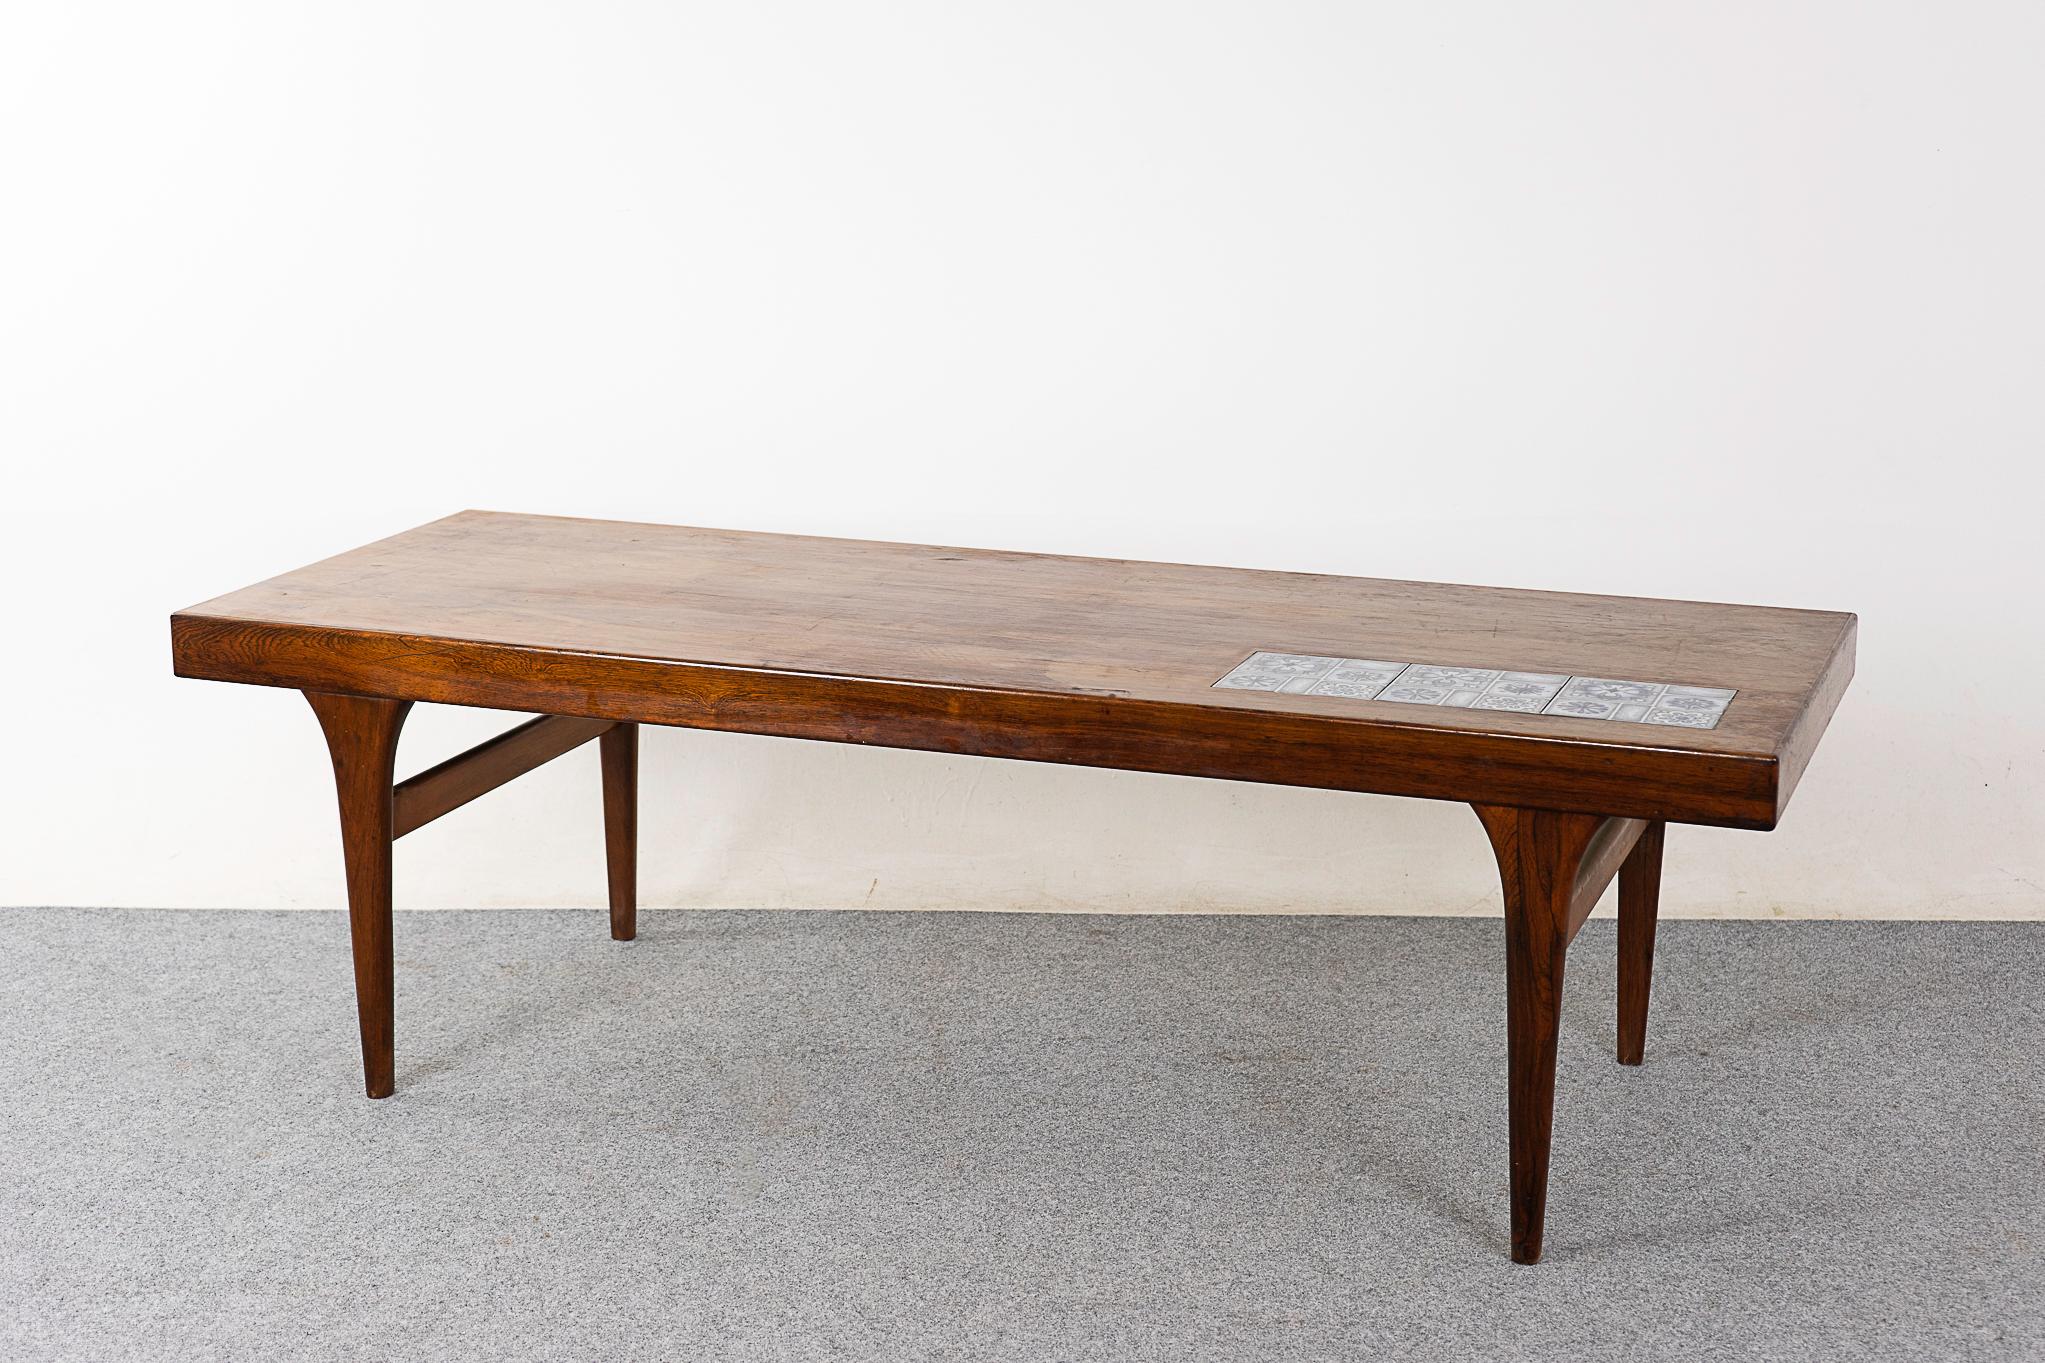 Ceramic Danish Mid-Century Modern Rosewood & Tile Coffee Table by Johannes Andersen For Sale